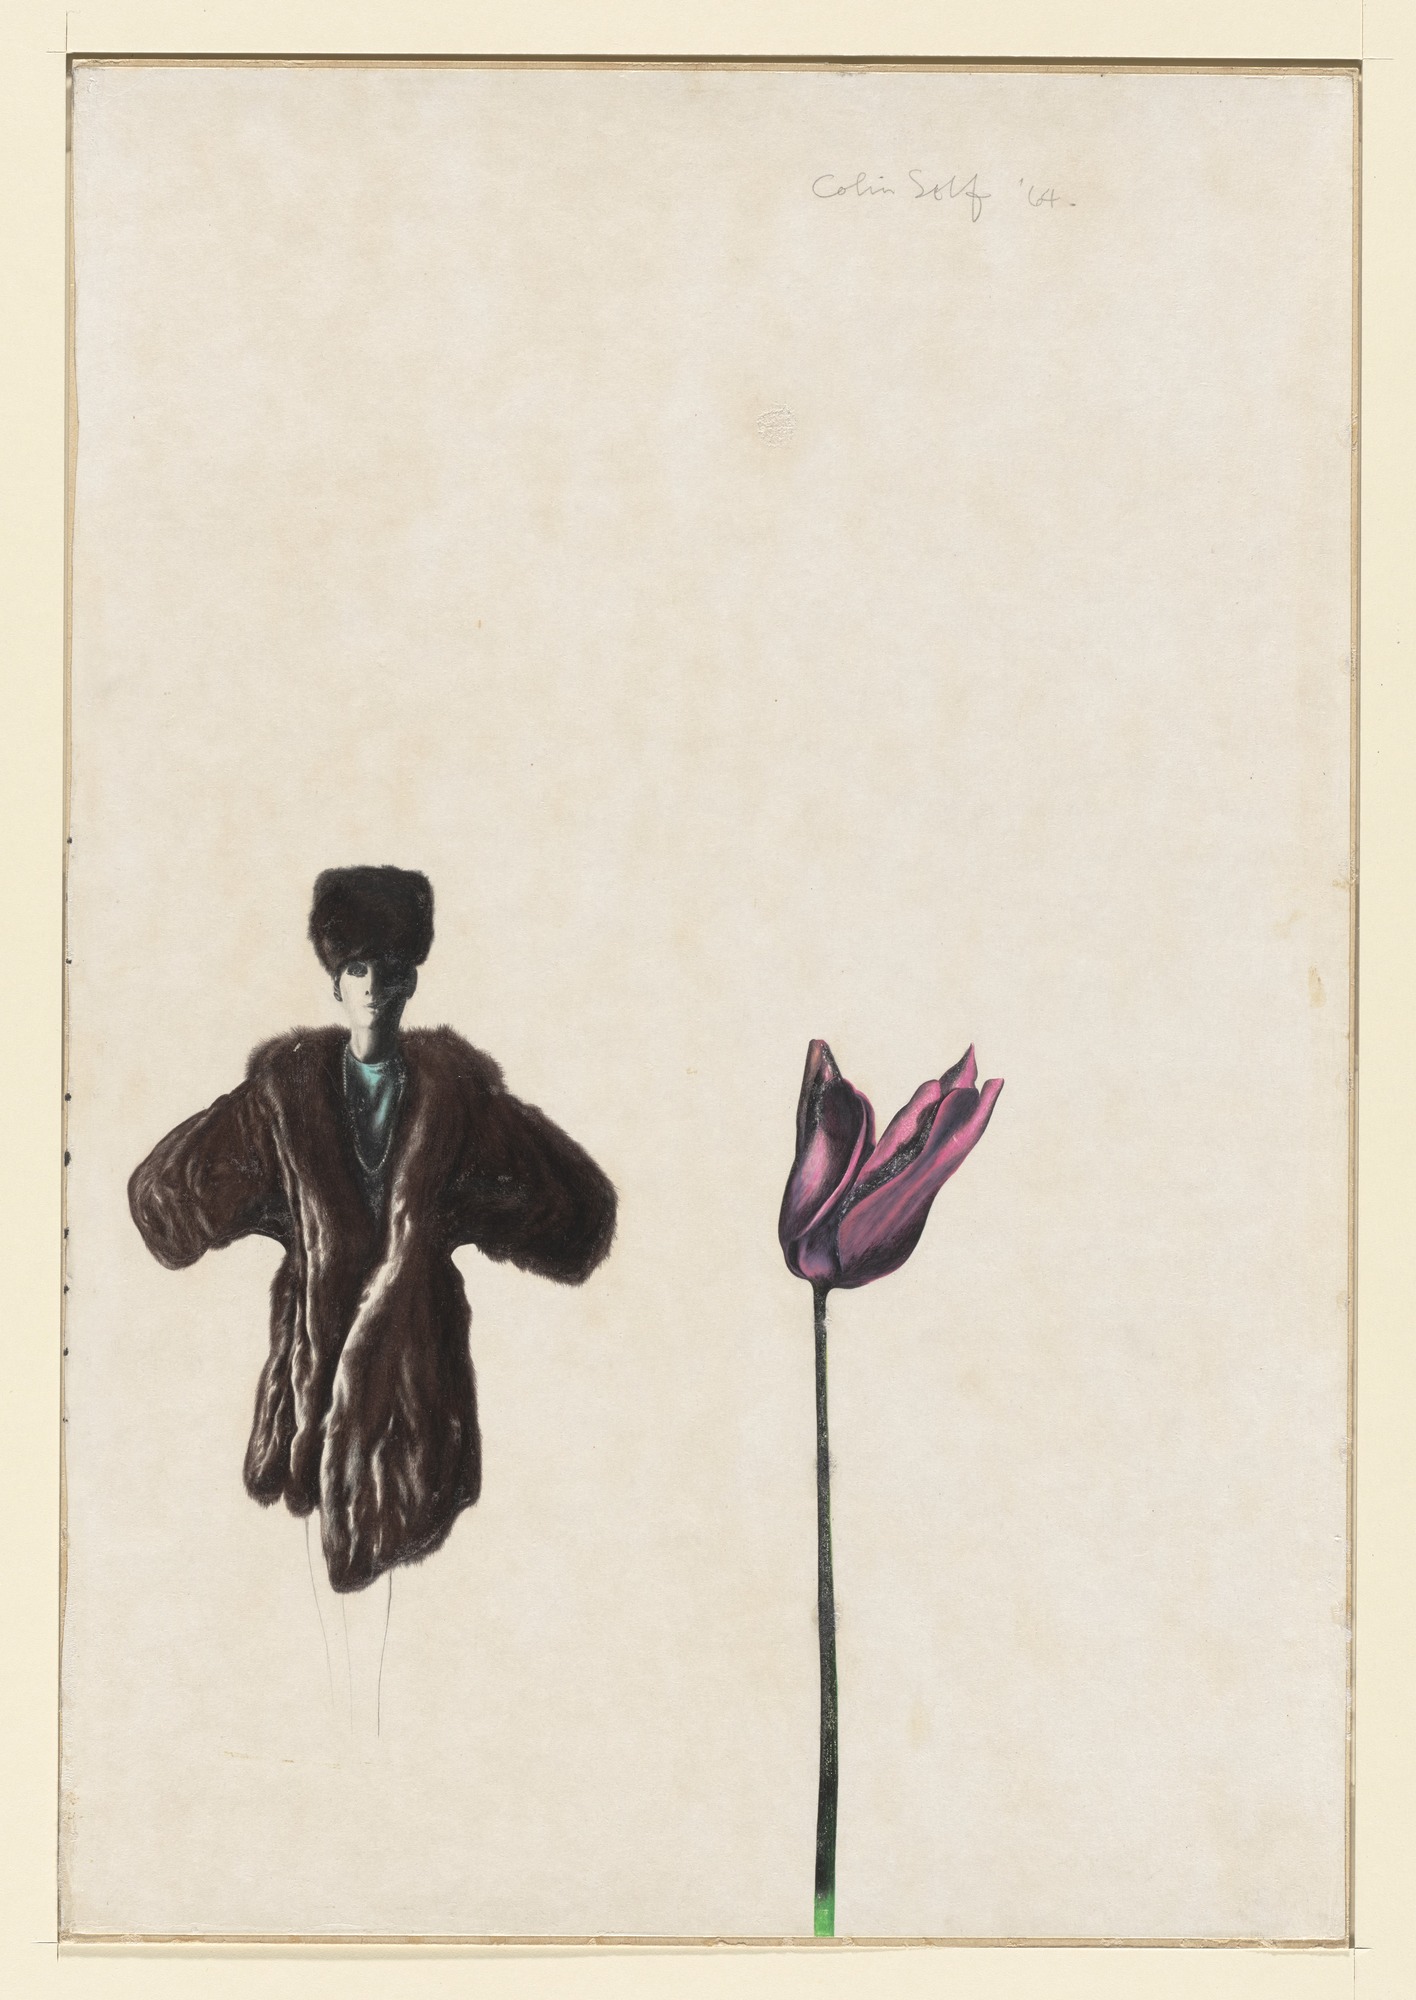  "Woman in a Fur Coat and Tulip," 1964, Colin Self. Courtesy of the Museum of Modern Art. 